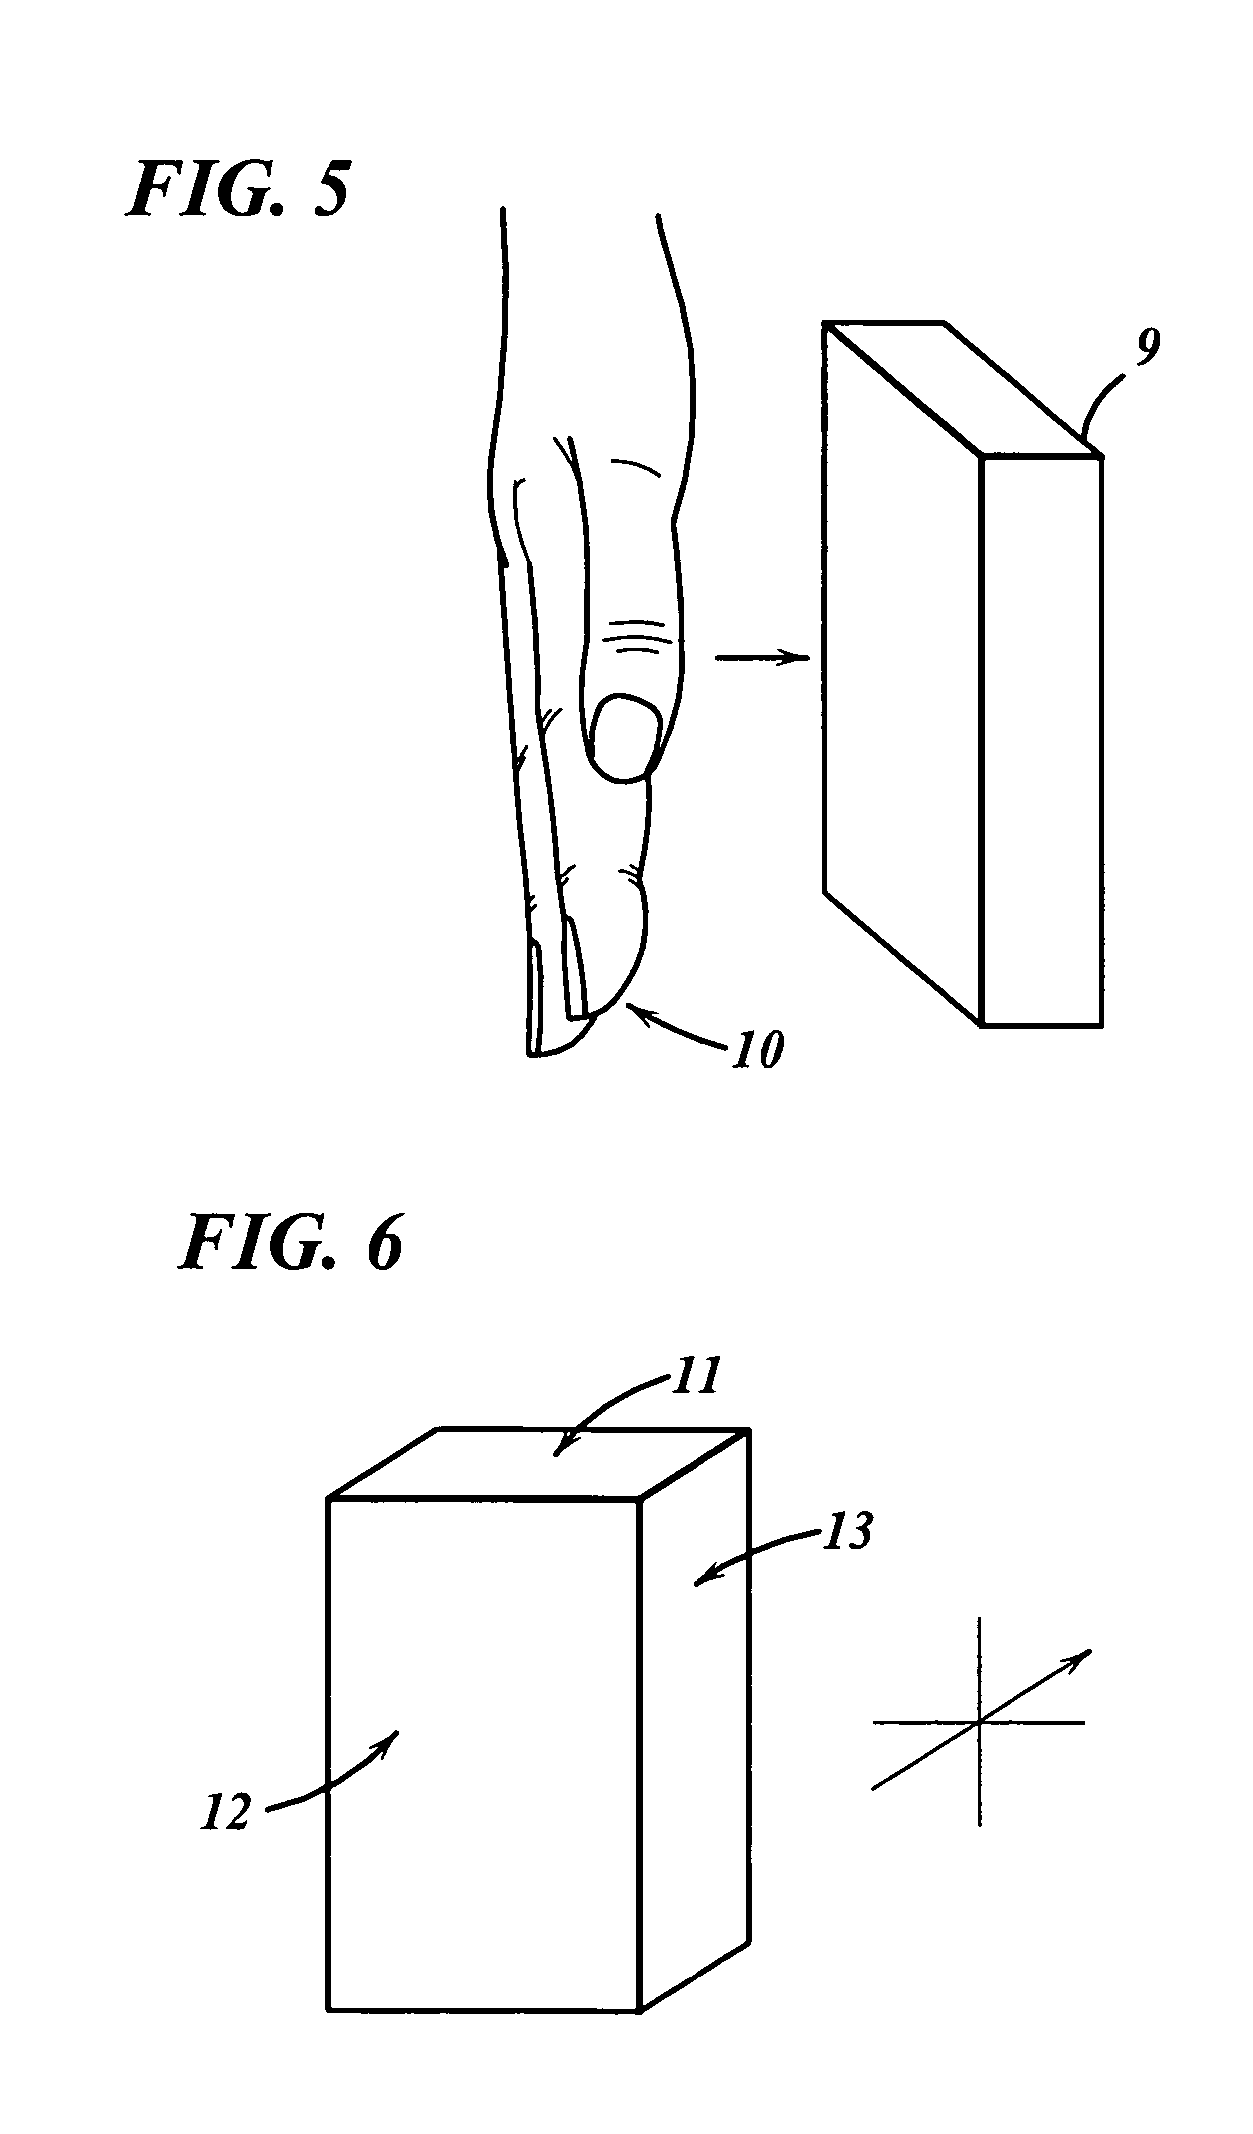 Alert muting method through indirect contact for portable devices